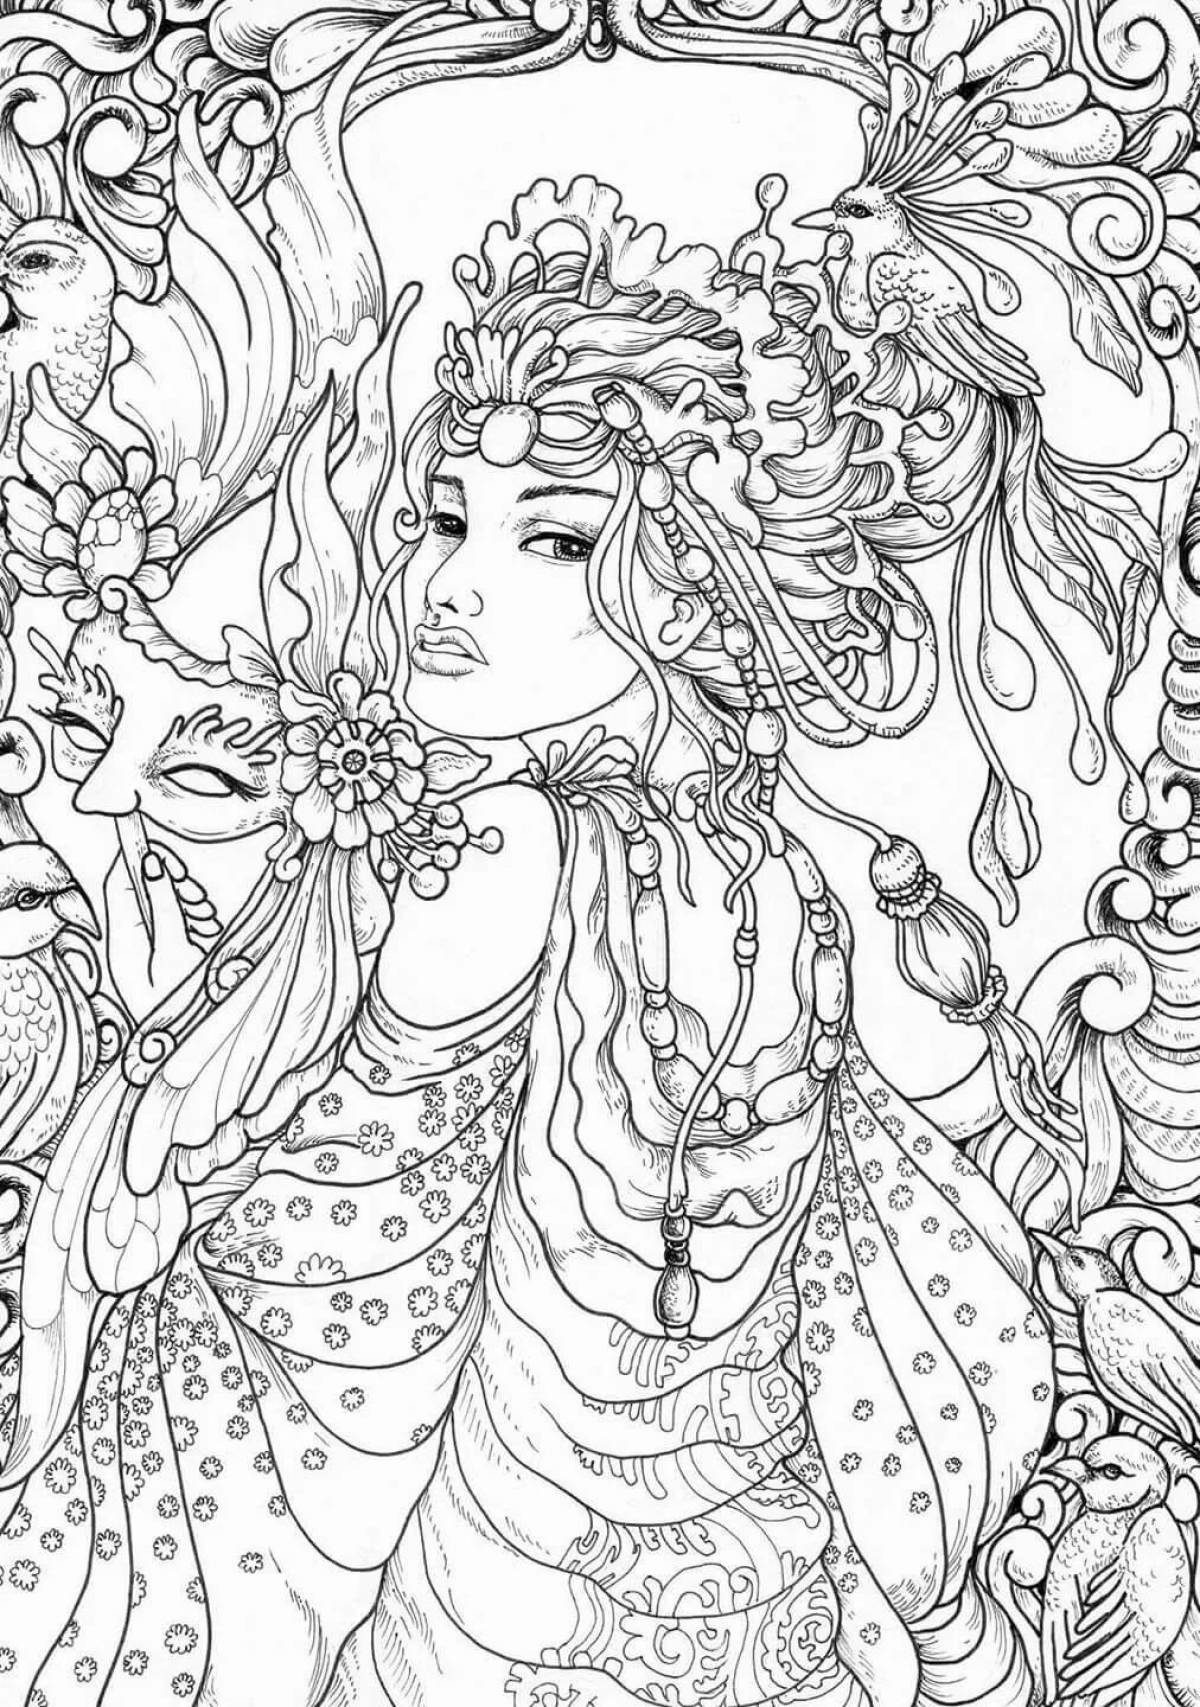 Venerable coloring book, beautiful for all adults